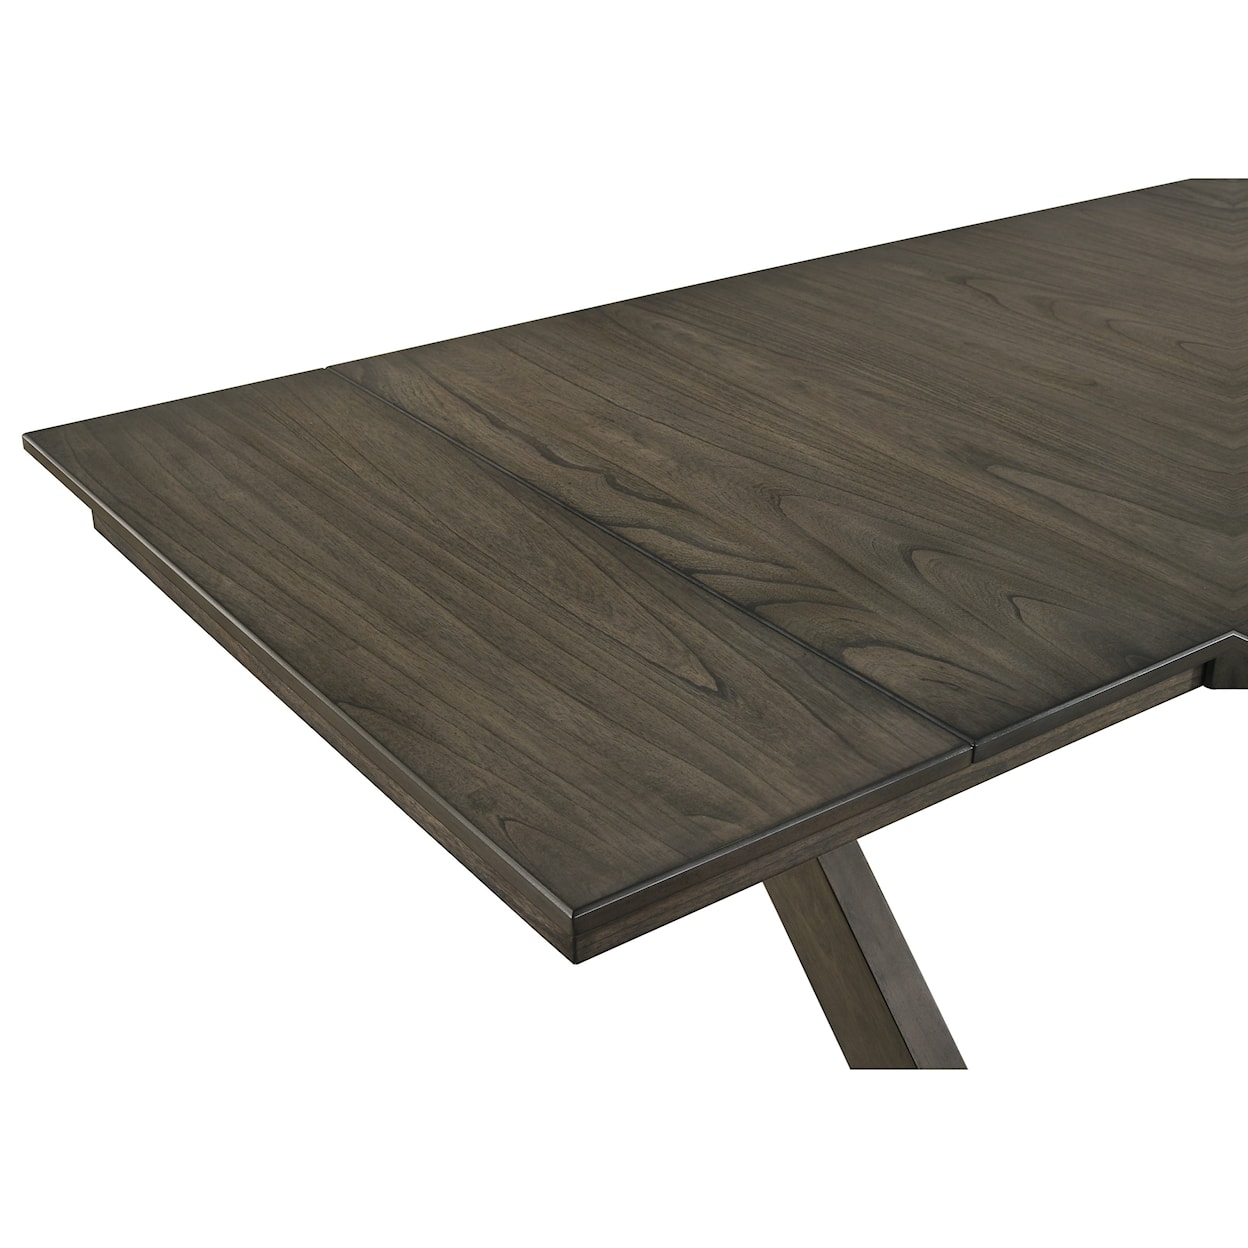 New Classic ANGUS Dining Table